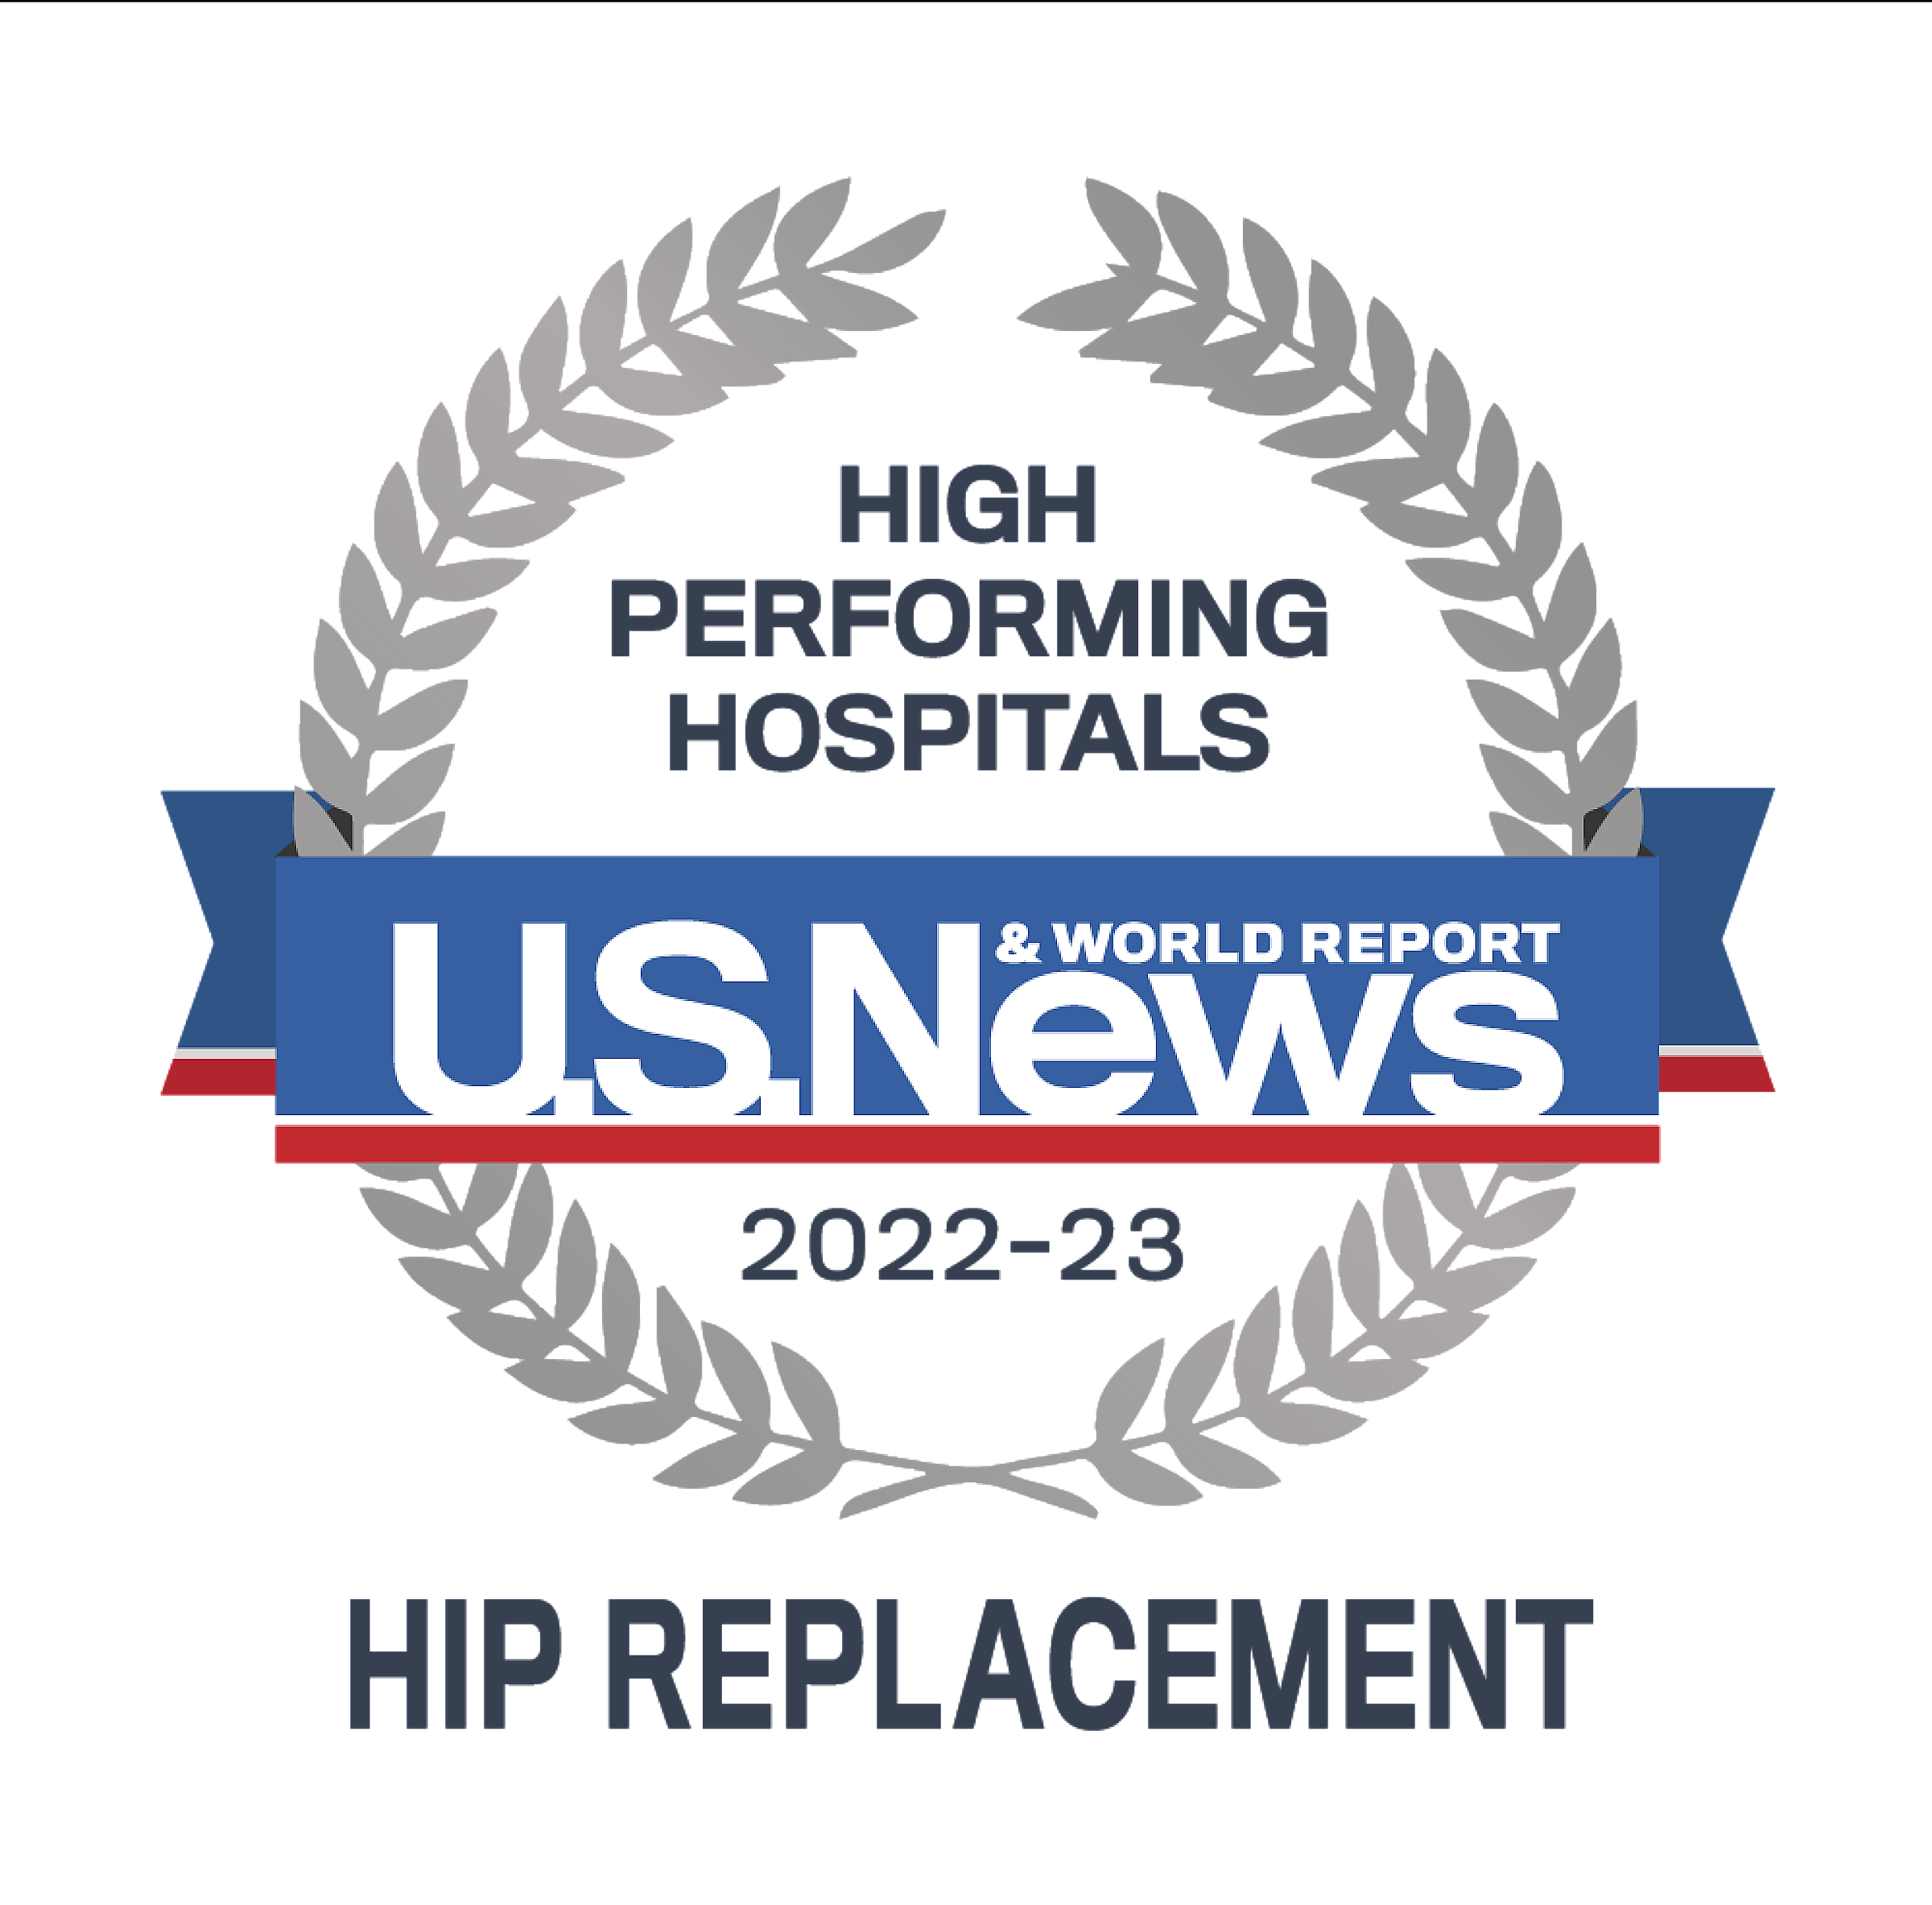 US News & World Report high performing care for hip replacement 2022-2023